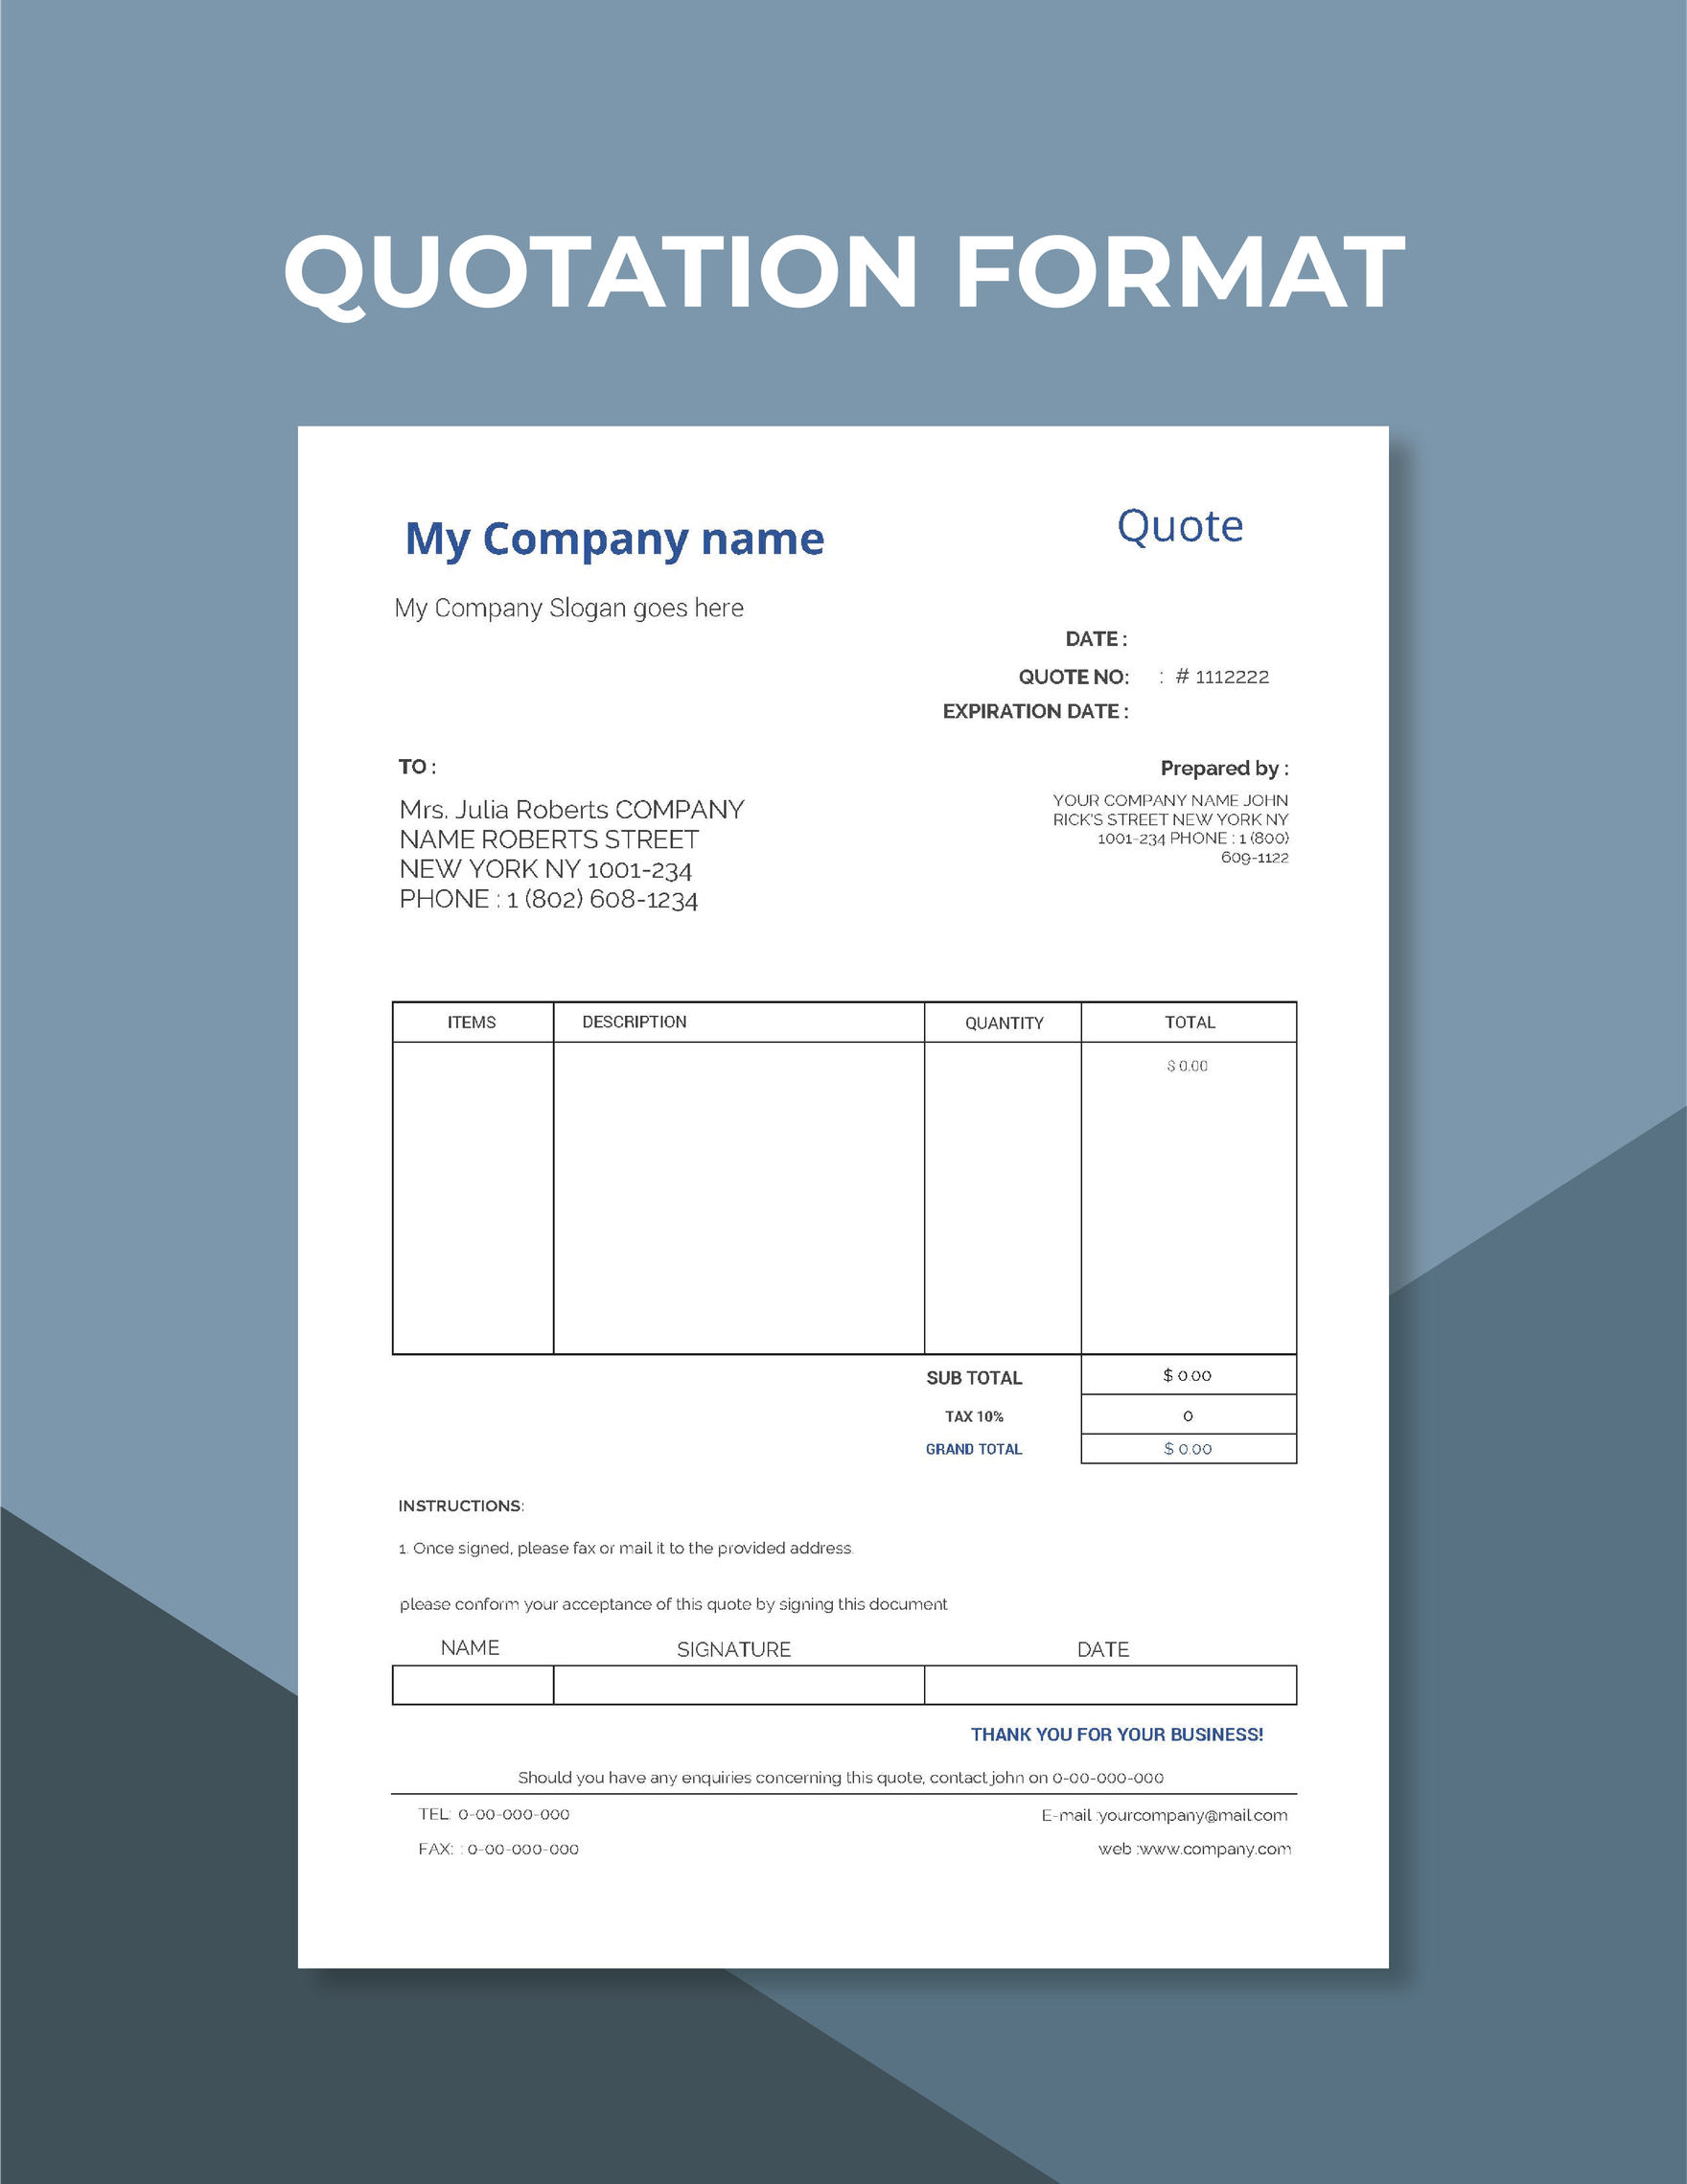 Quotation Format Template in Word, Google Docs, Excel, PDF, Google Sheets, Apple Pages, Apple Numbers